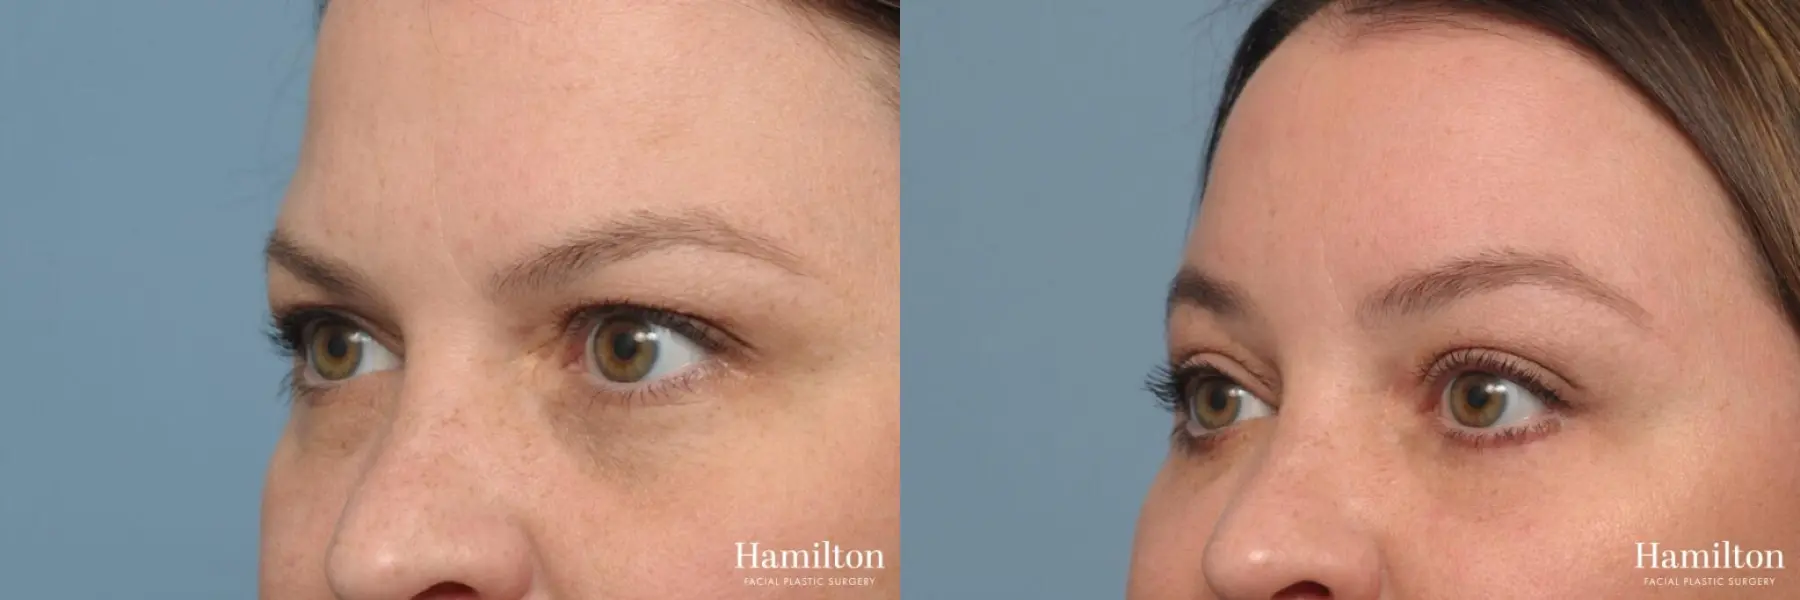 Brow Lift: Patient 1 - Before and After 2